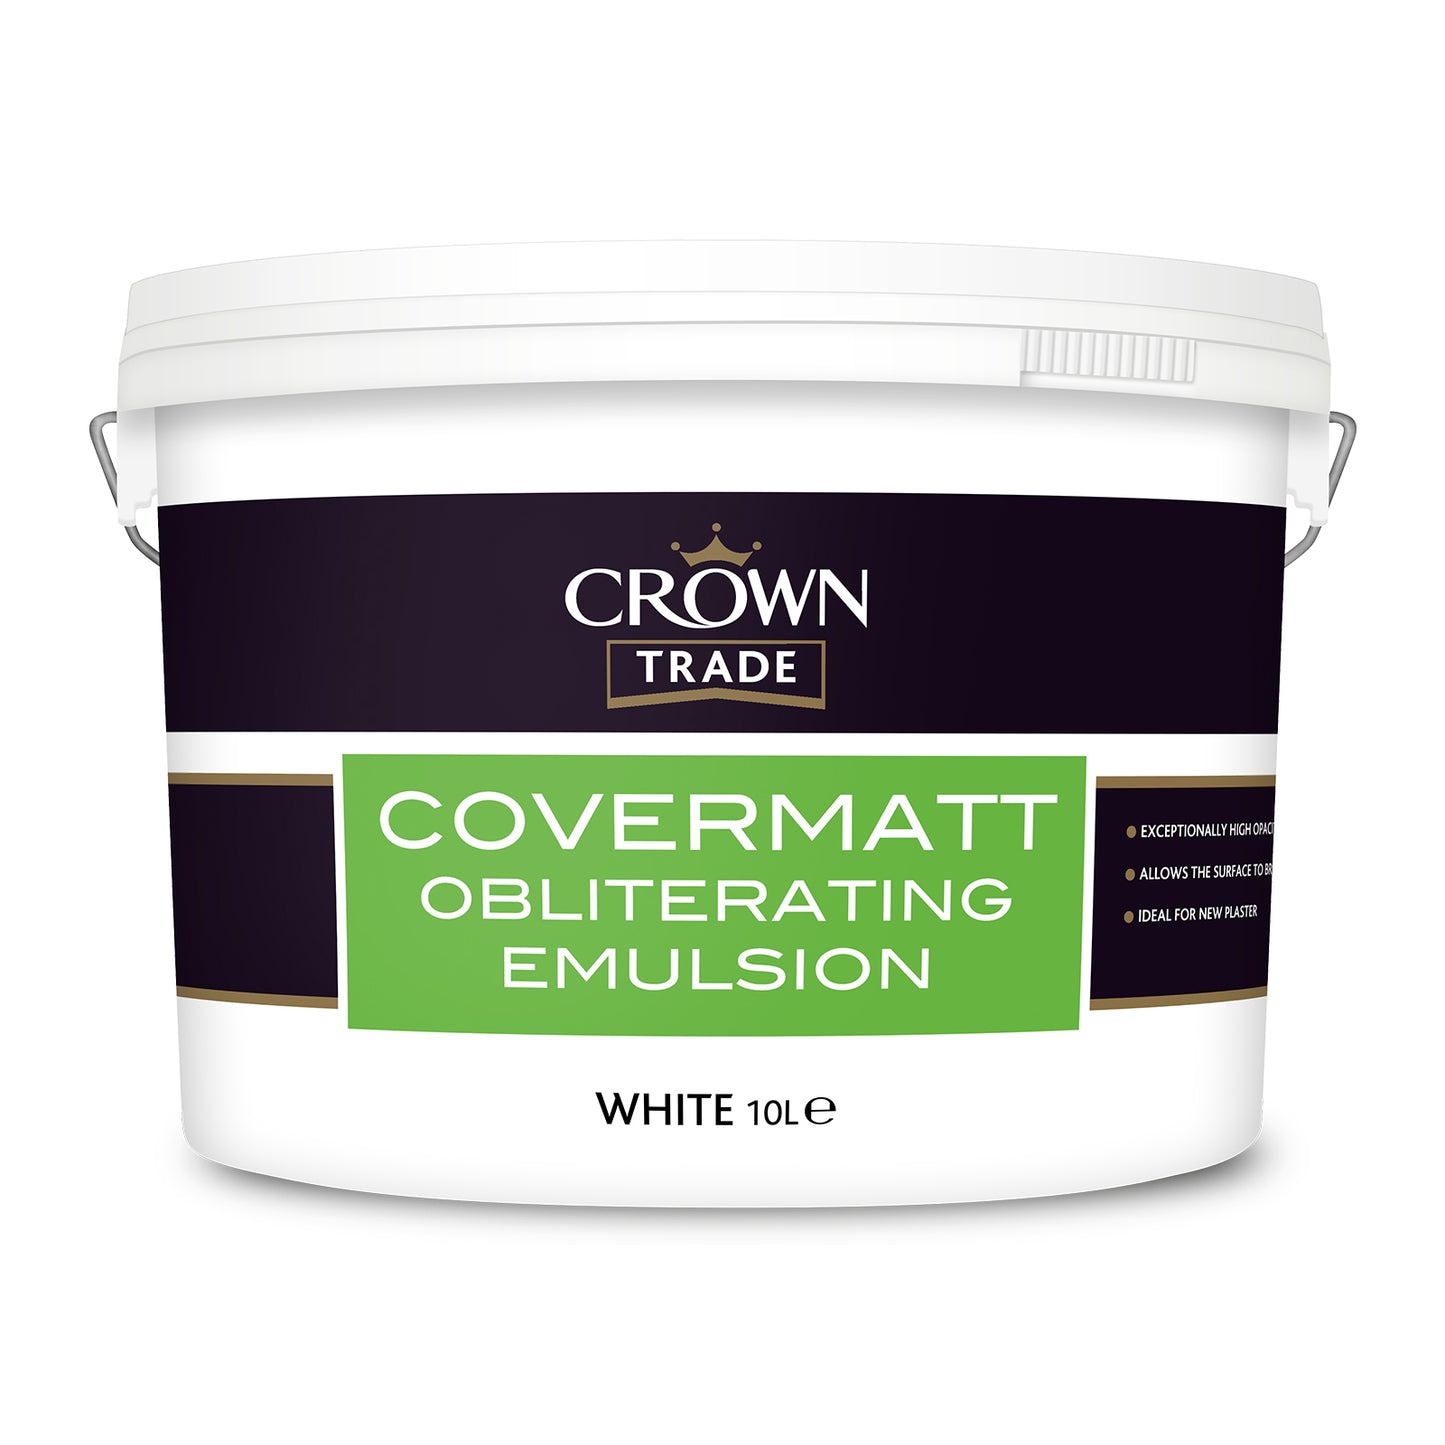 Crown Trade Covermatt Obliterating Emulsion - IN STORE ONLY OFFER